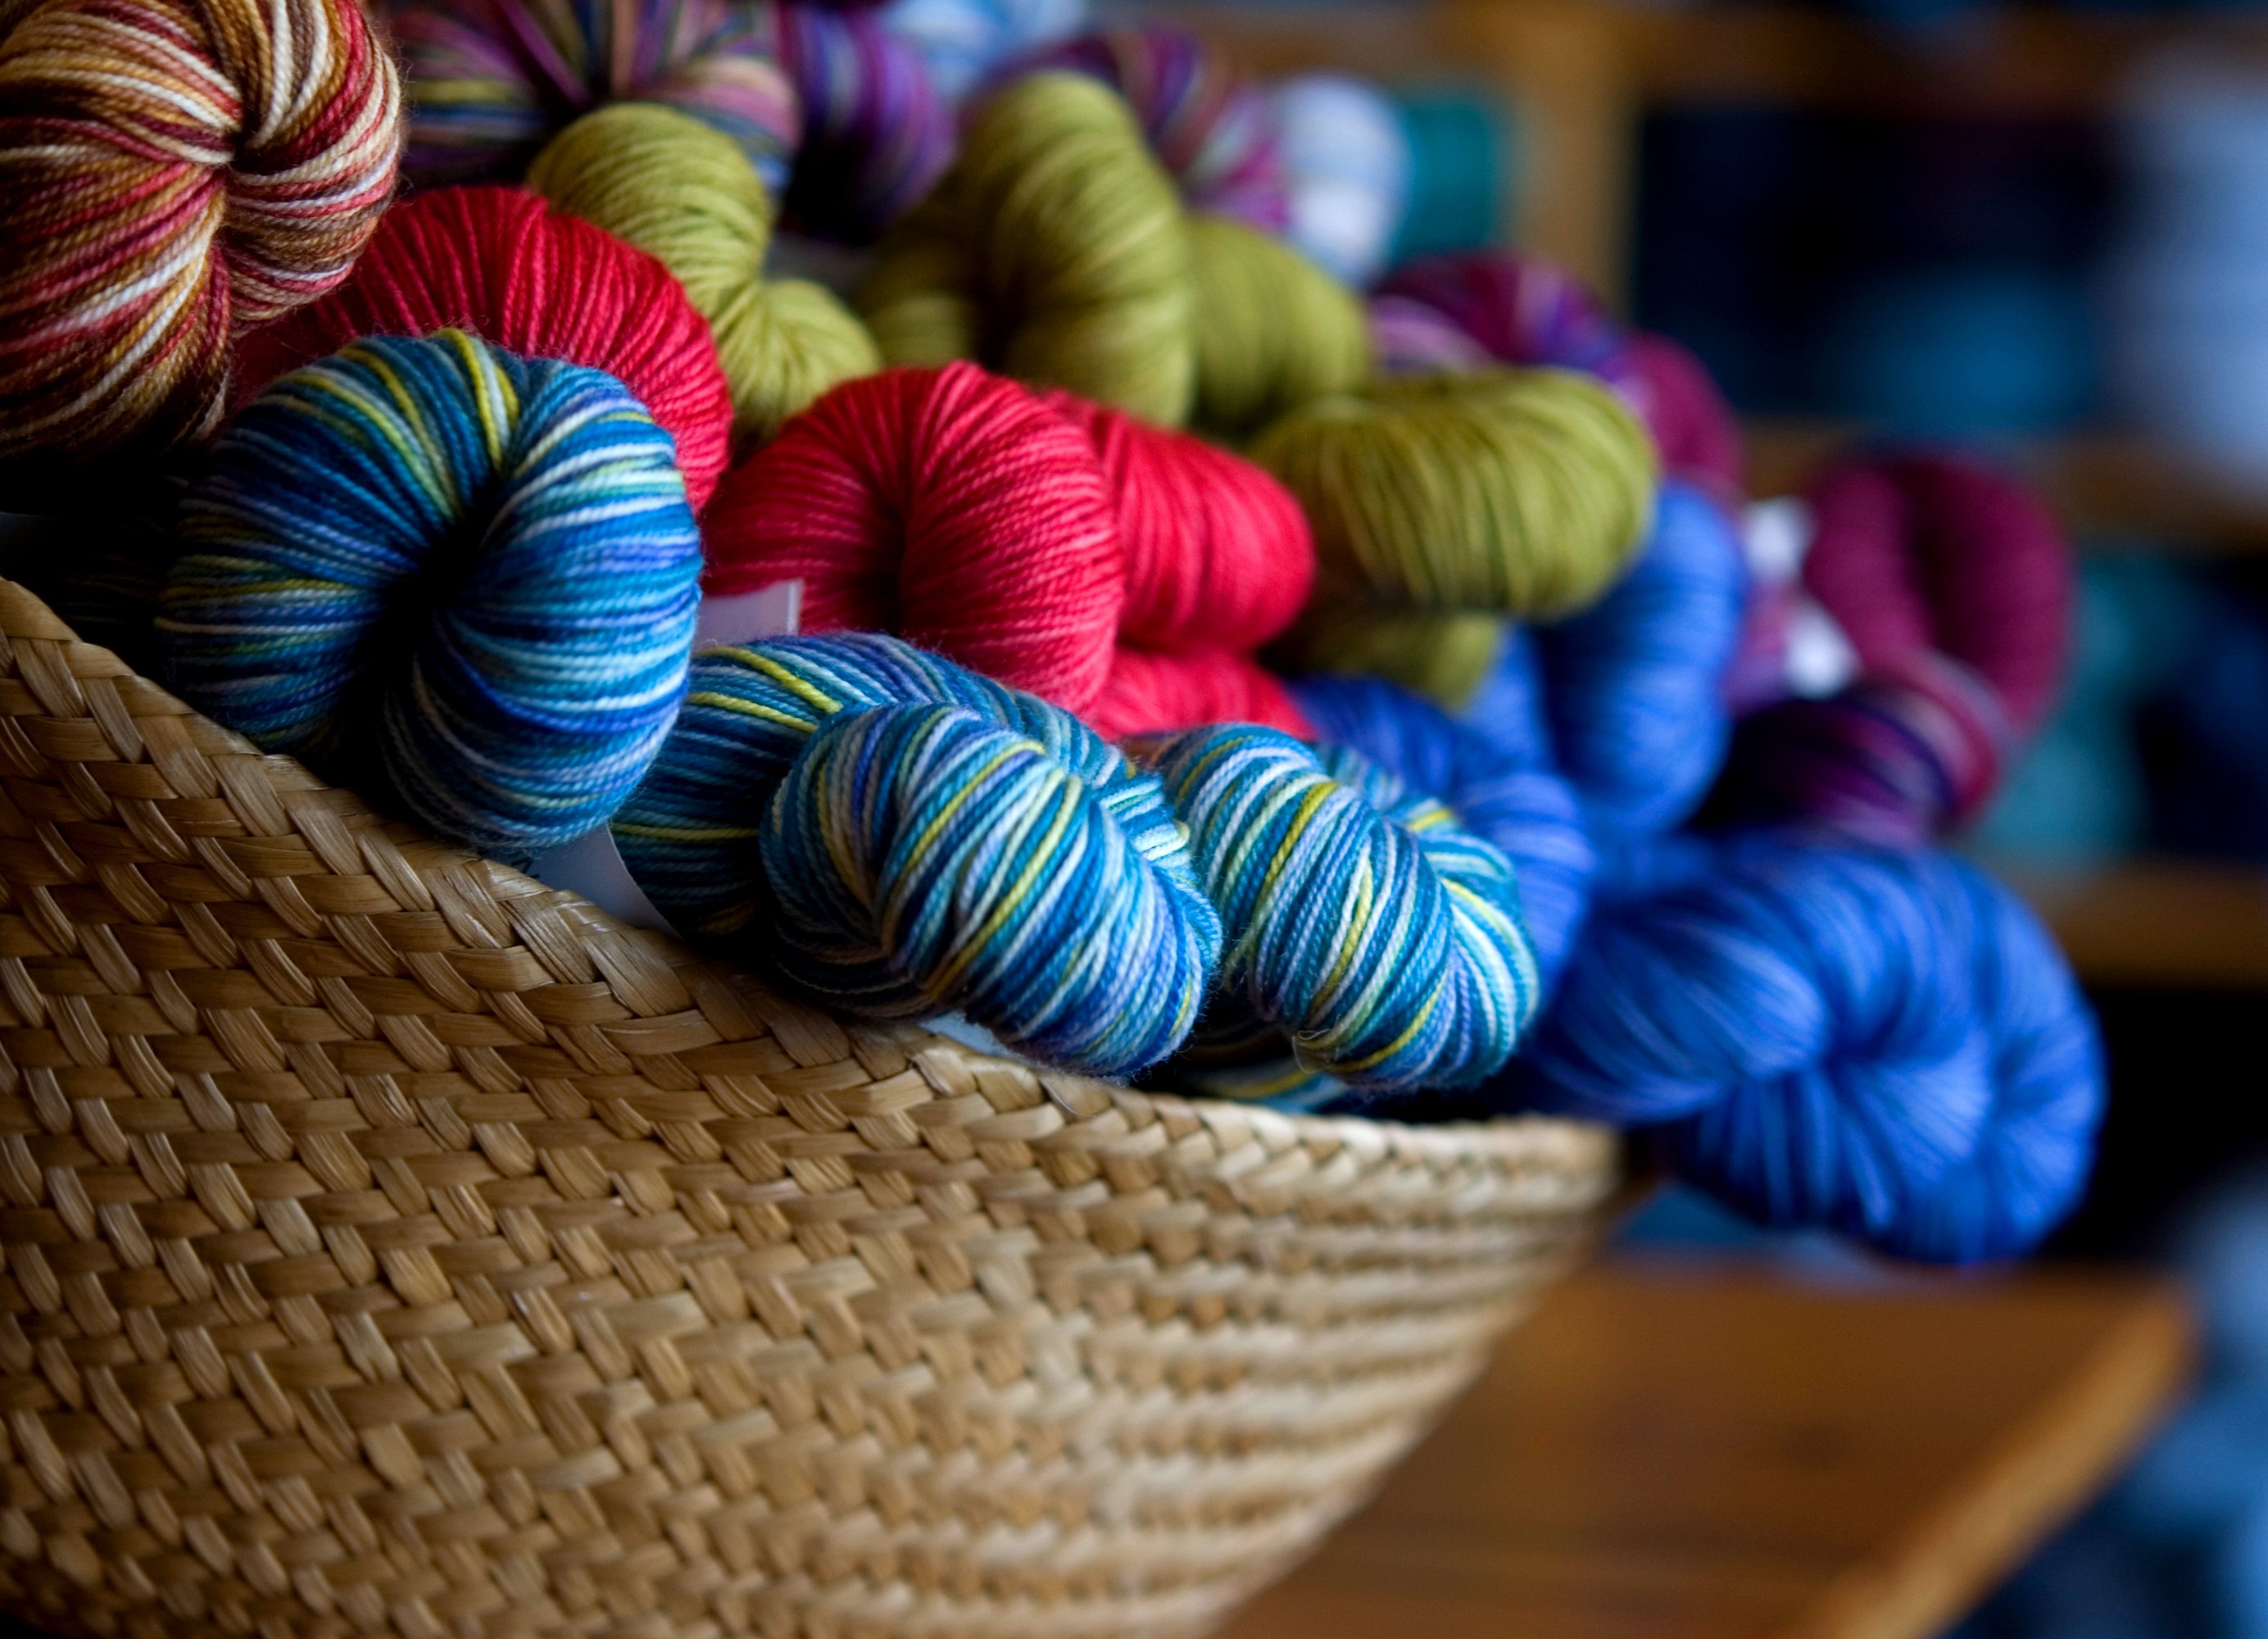 Download hd wallpapers of 436413-yarn, String, Pattern, Knitting, Rope, Psy...